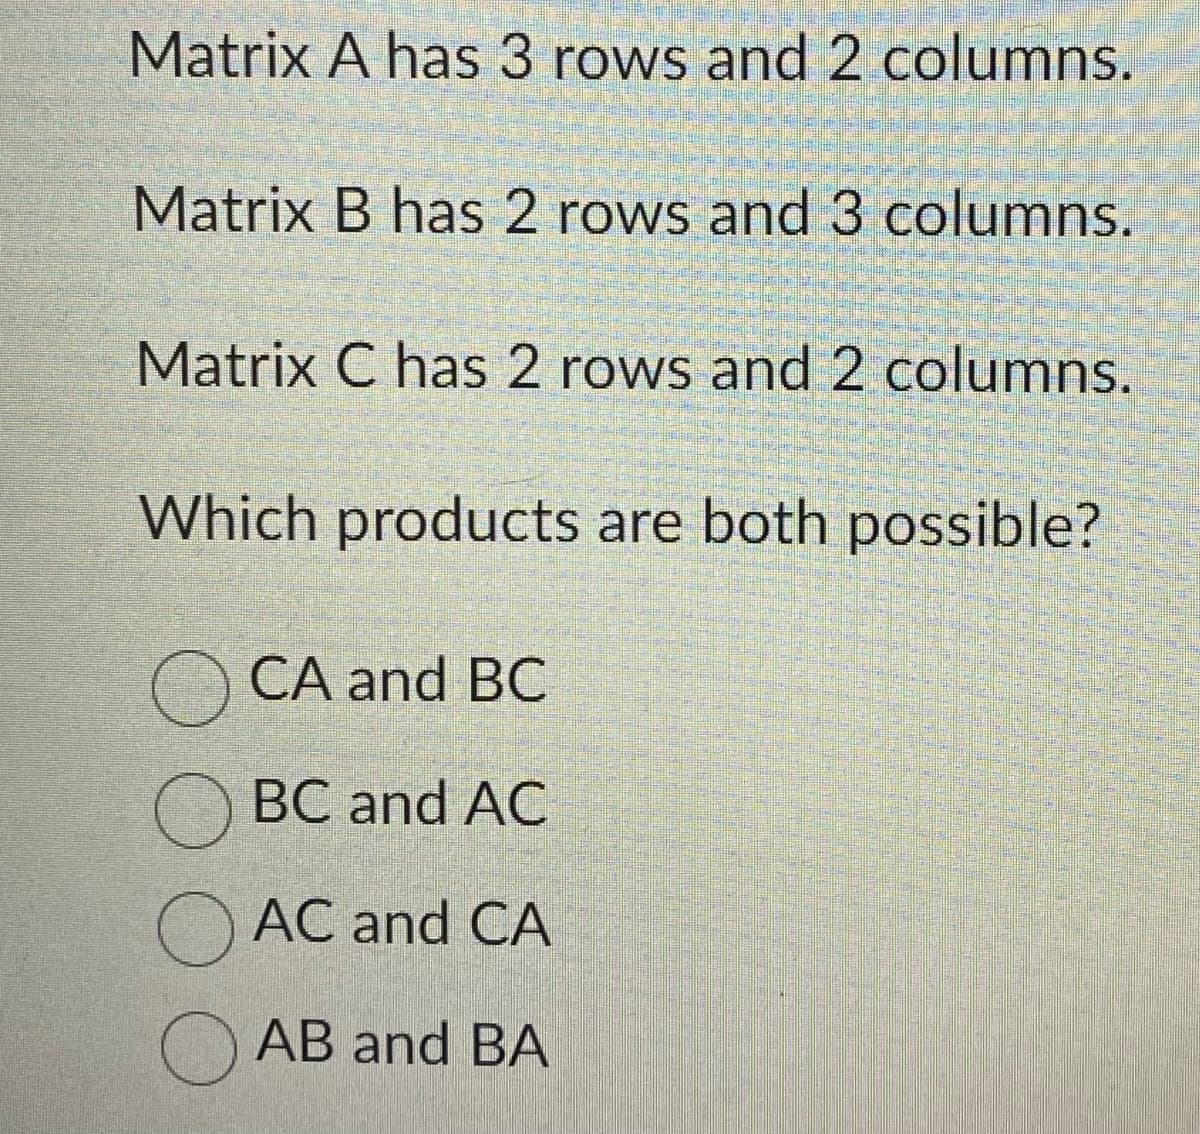 Matrix A has 3 rows and 2 columns.
Matrix B has 2 rows and 3 columns.
Matrix C has 2 rows and 2 columns.
Which products are both possible?
CA and BC
BC and AC
AC and CA
AB and BA